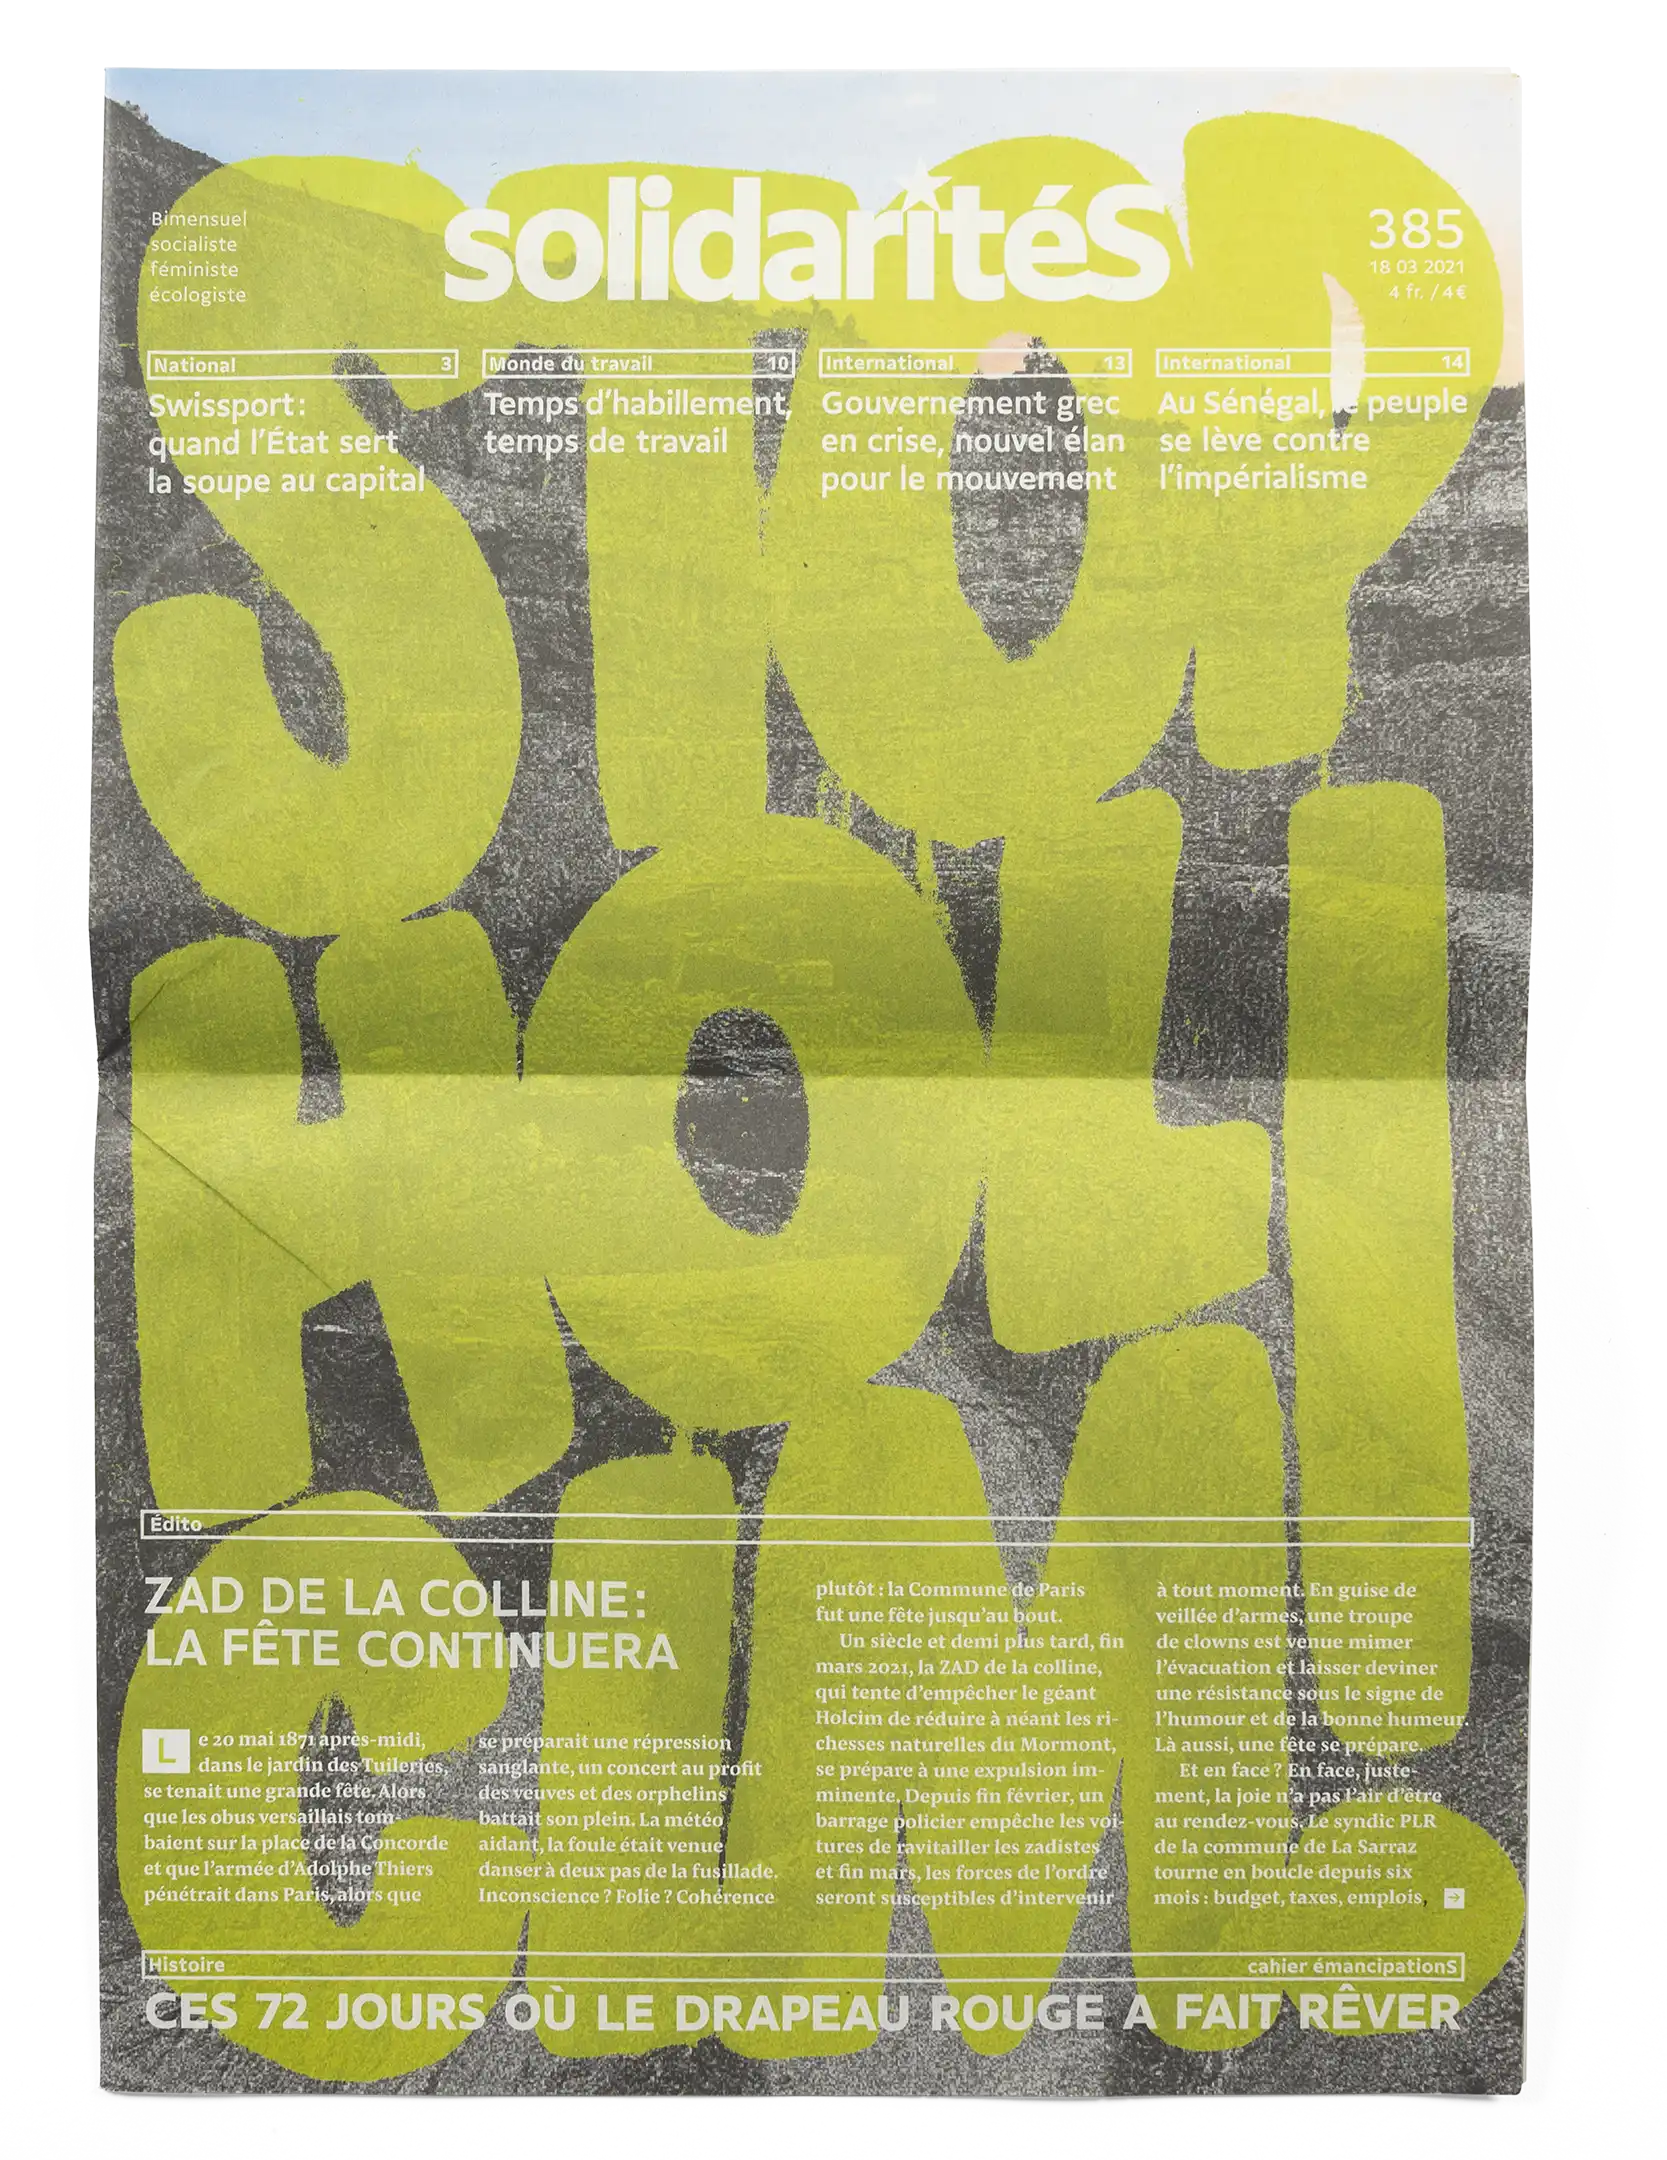 Cover of solidaritéS journal issue 385, with a collage and lettering about Holcim